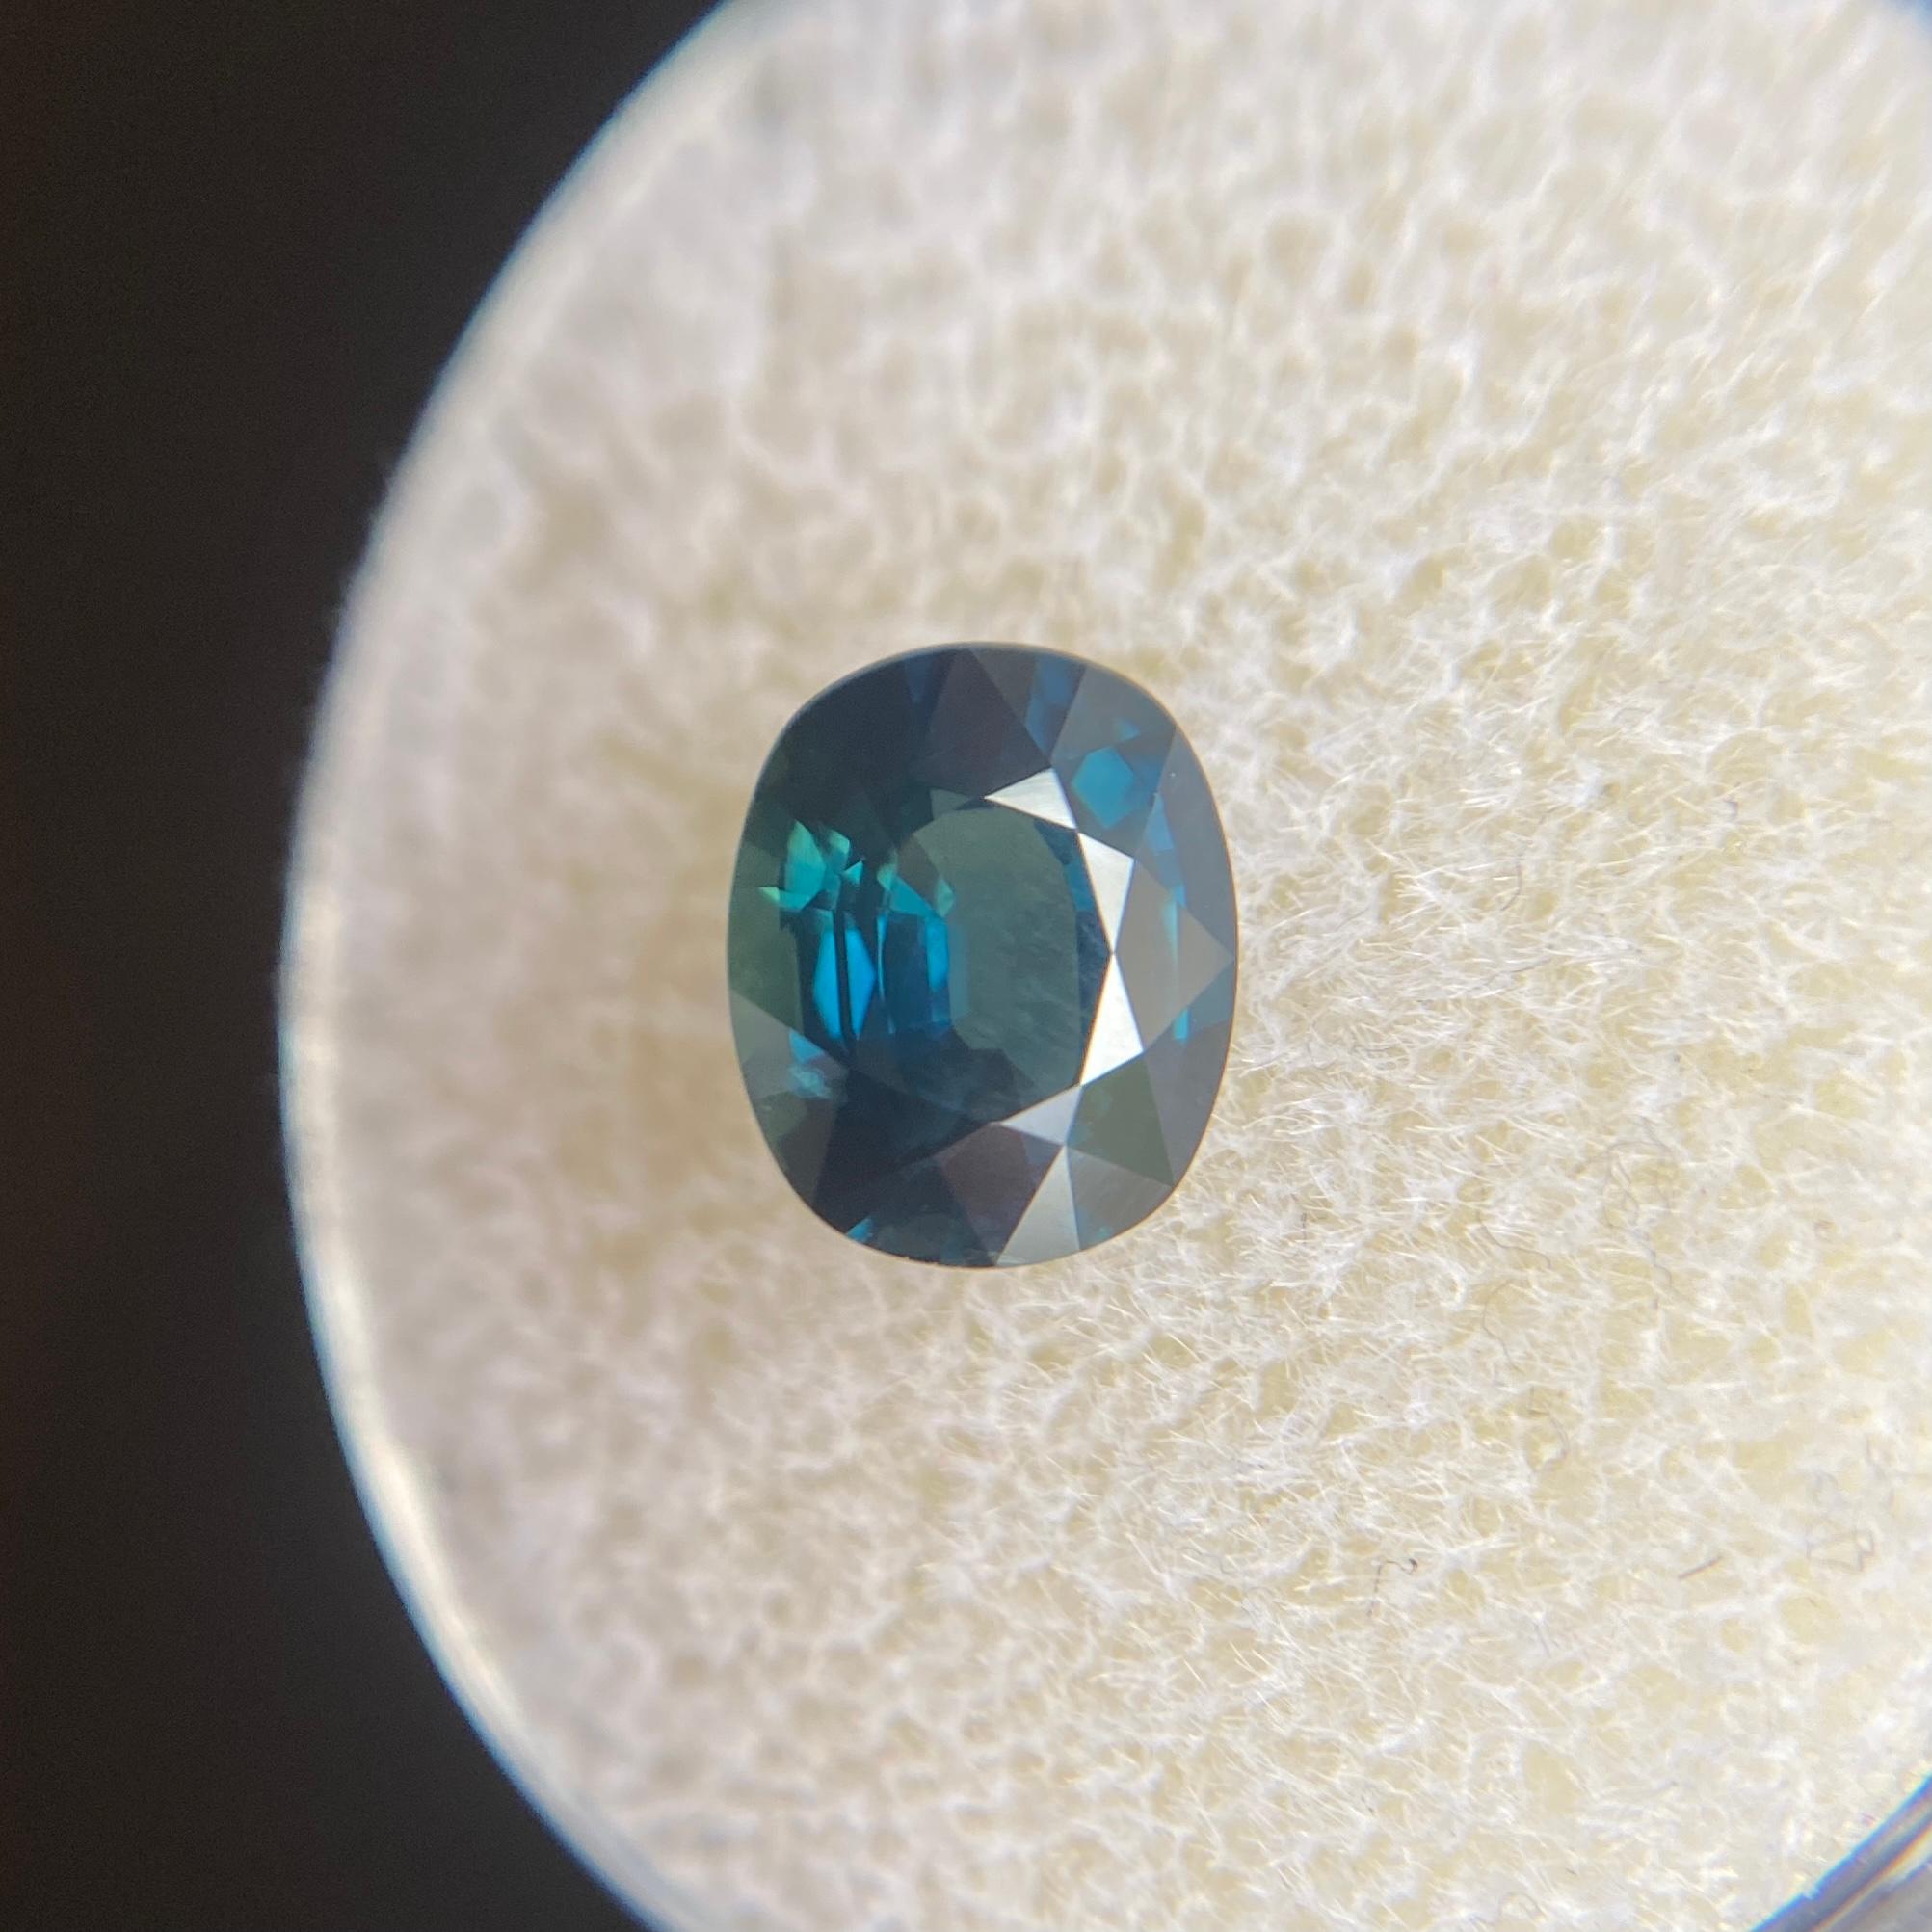 Fine Deep Teal Blue Sapphire Gemstone.

Natural sapphire with a stunning deep teal blue colour. 1.55 Carat with excellent clarity. Practically flawless. 

Also has an excellent cushion cut and ideal polish to show great shine and colour, would look